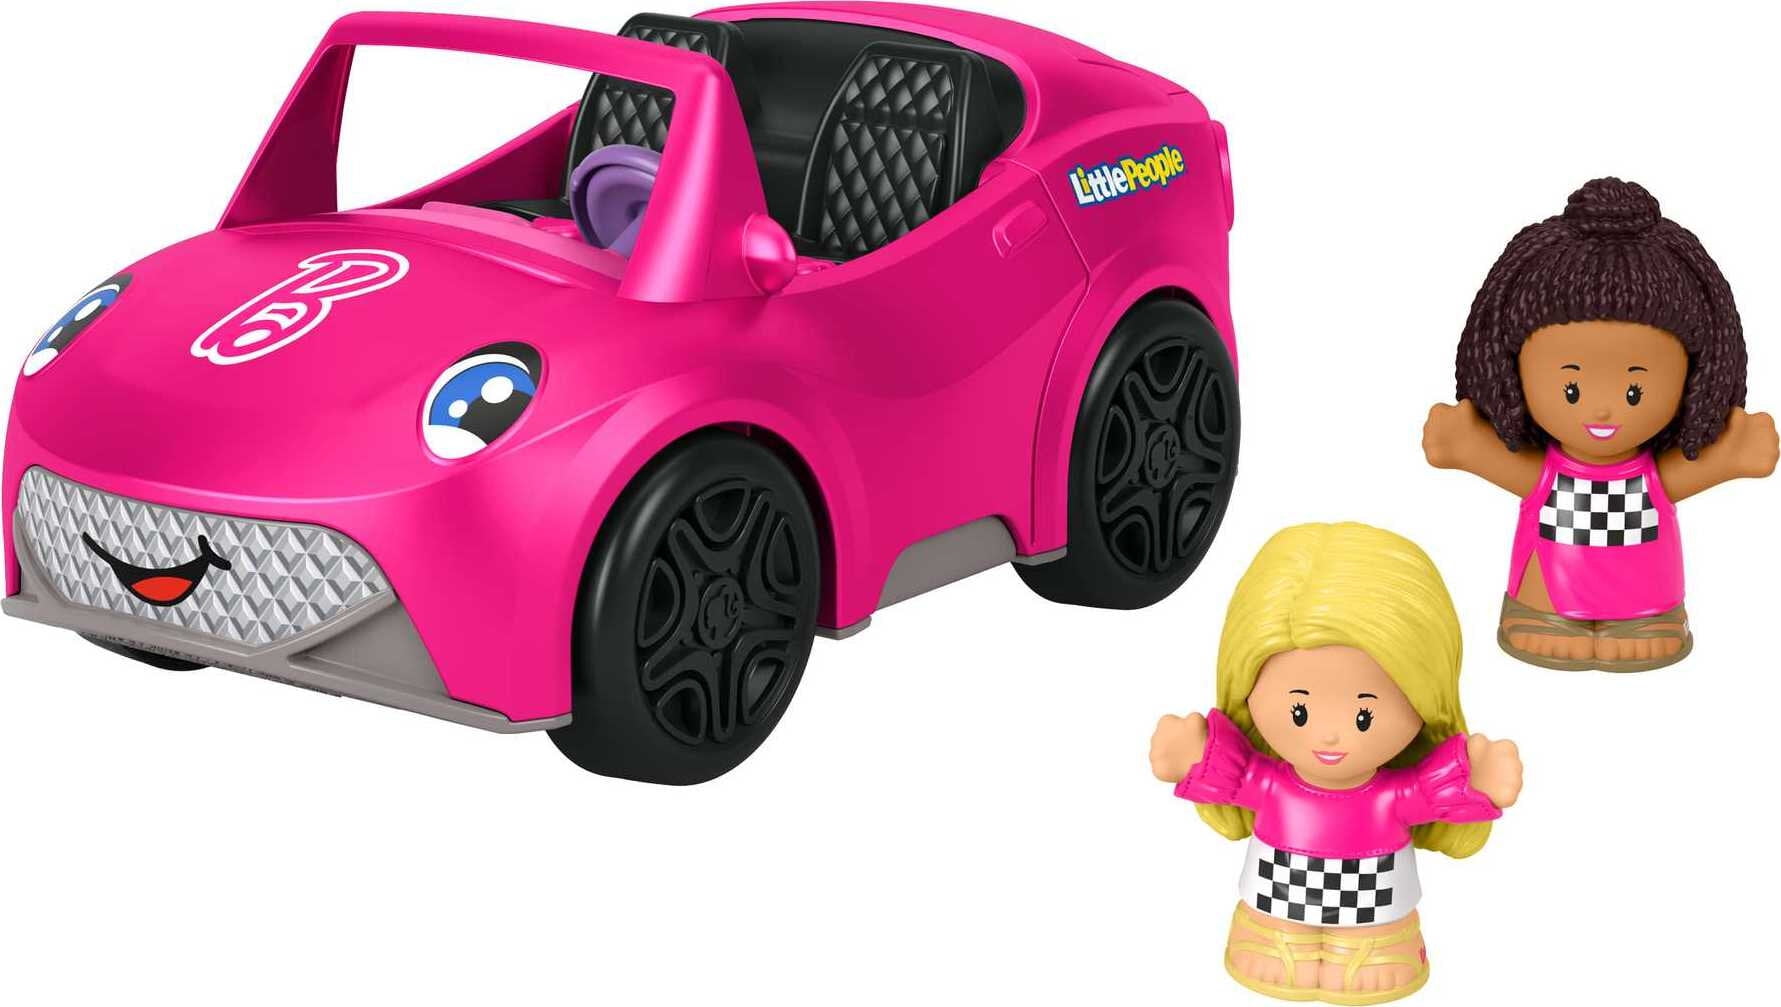 ​Barbie Convertible by Fisher-Price Little People, Push-Along Vehicle with Sounds and 2 Figures for Toddler and Preschool Pretend Play - Walmart.com